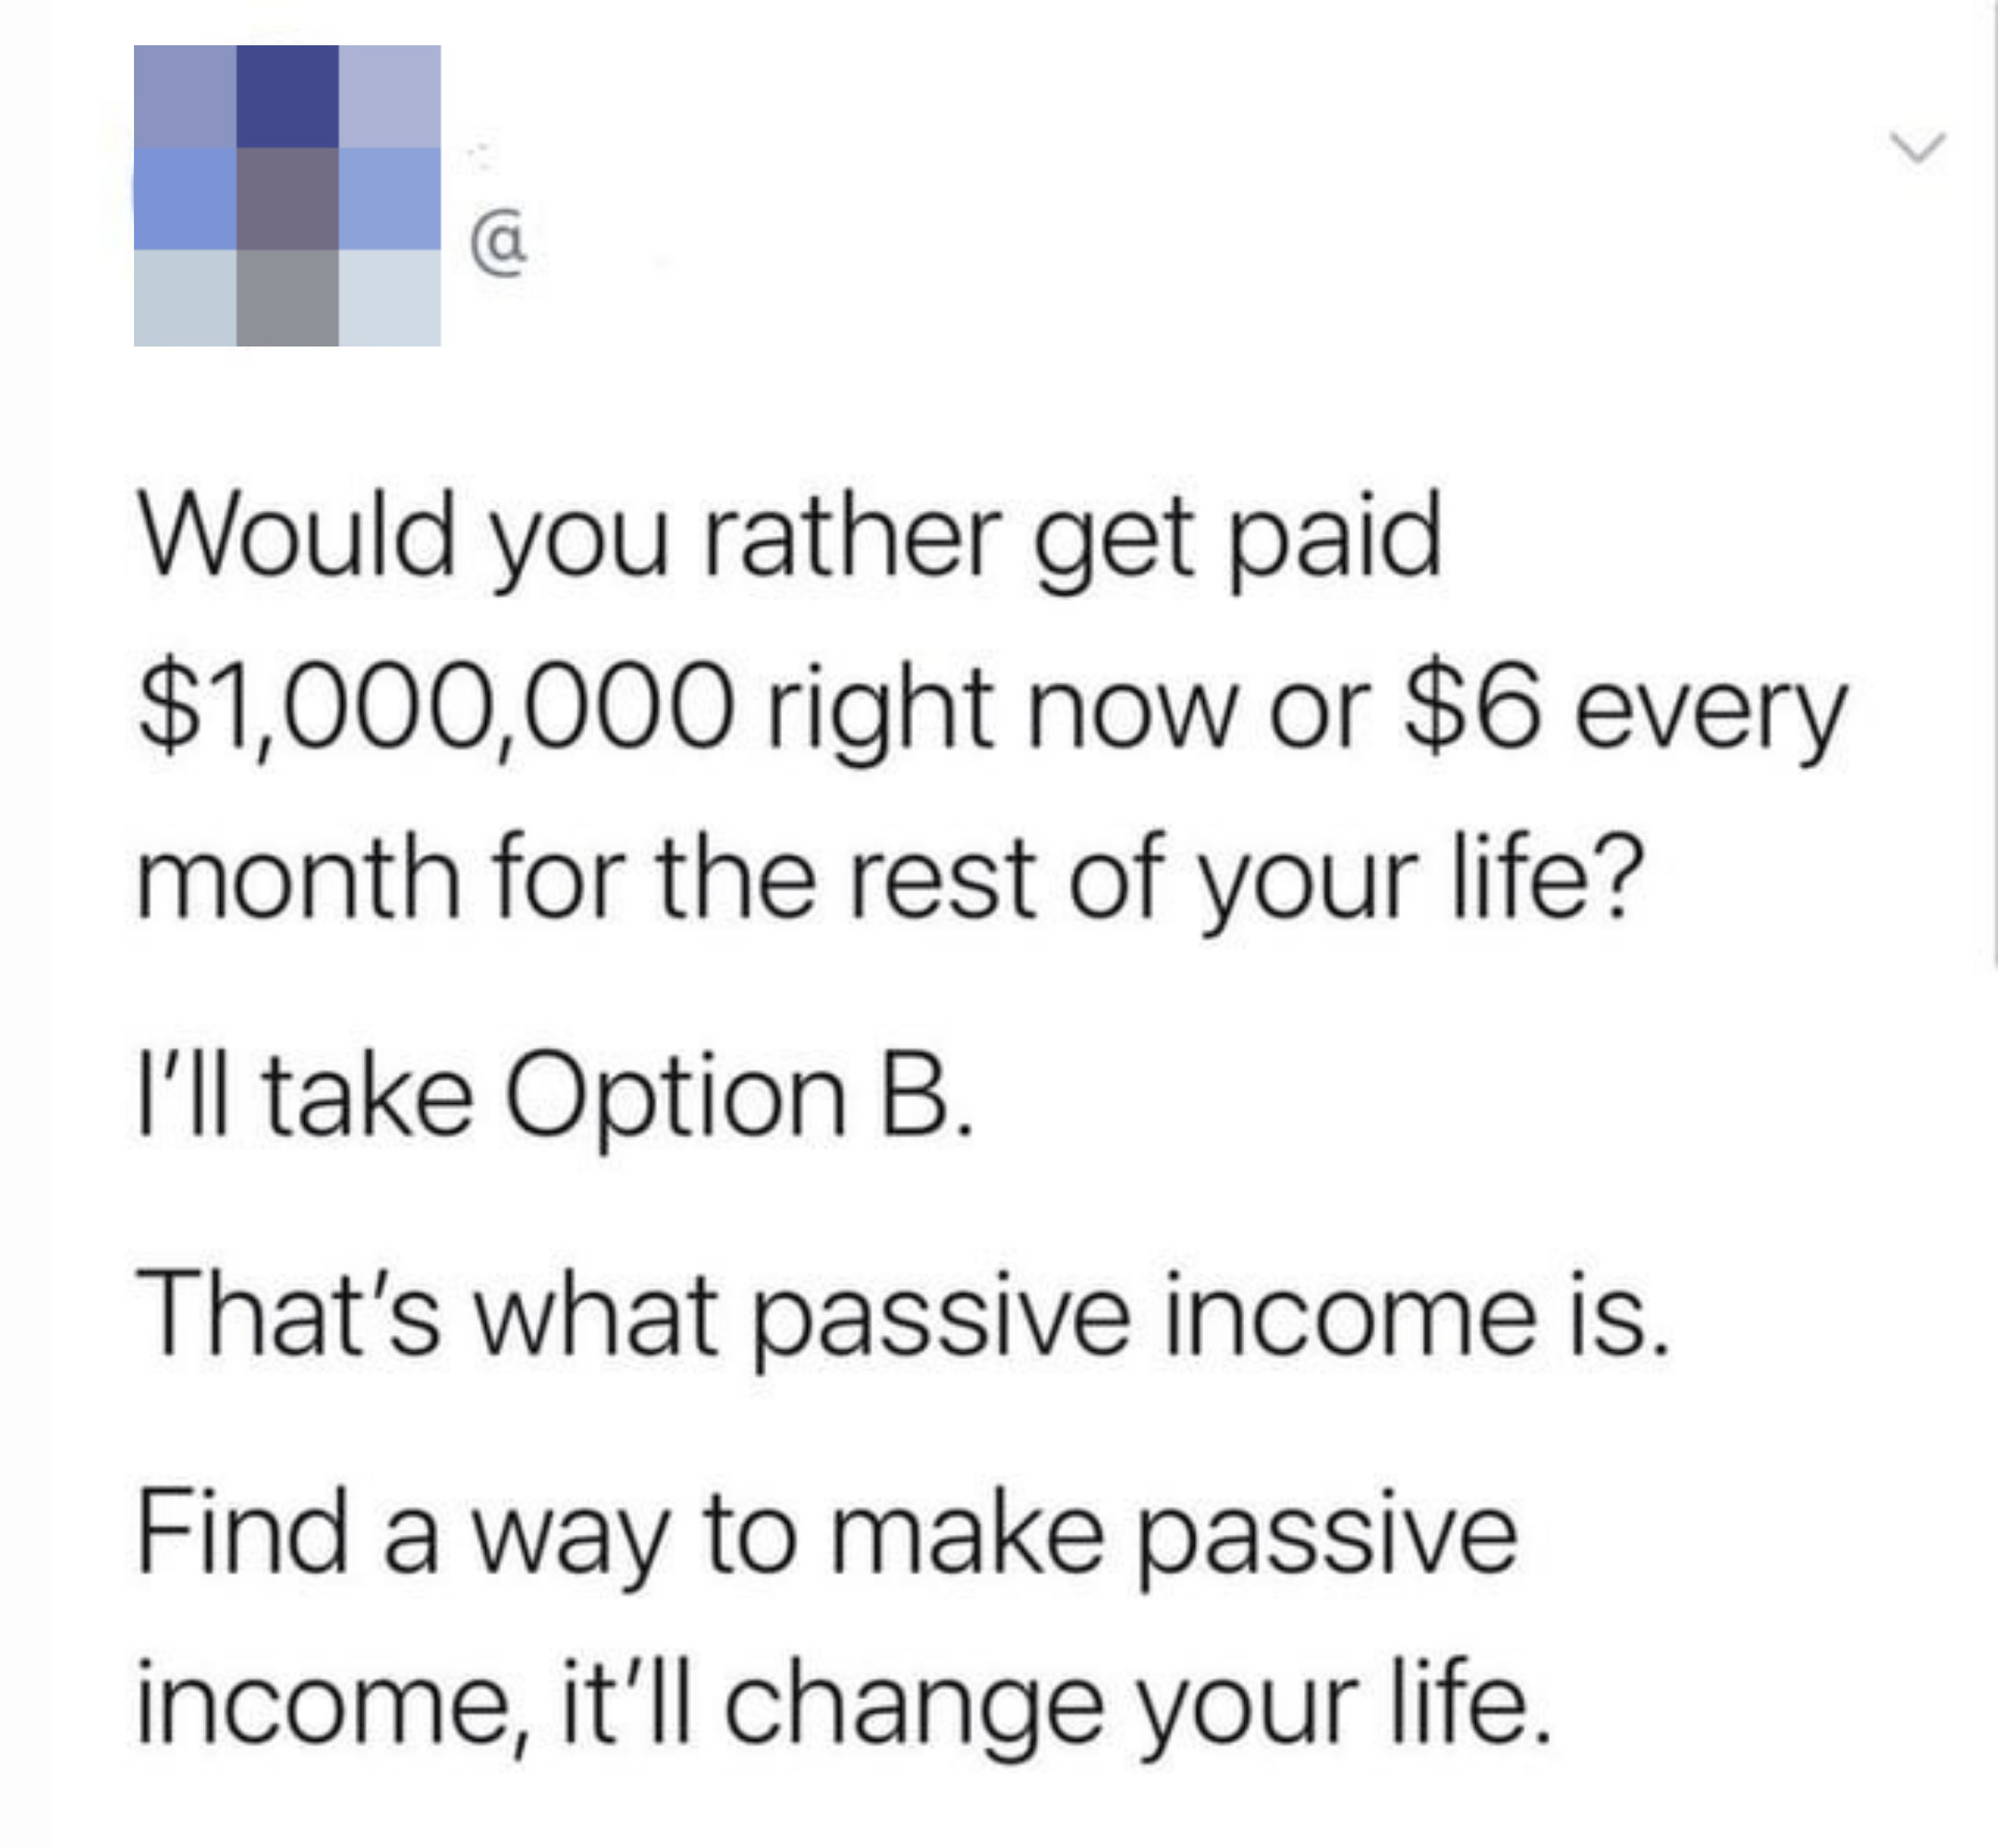 &quot;Find a way to make passive income, it&#x27;ll change your life.&quot;